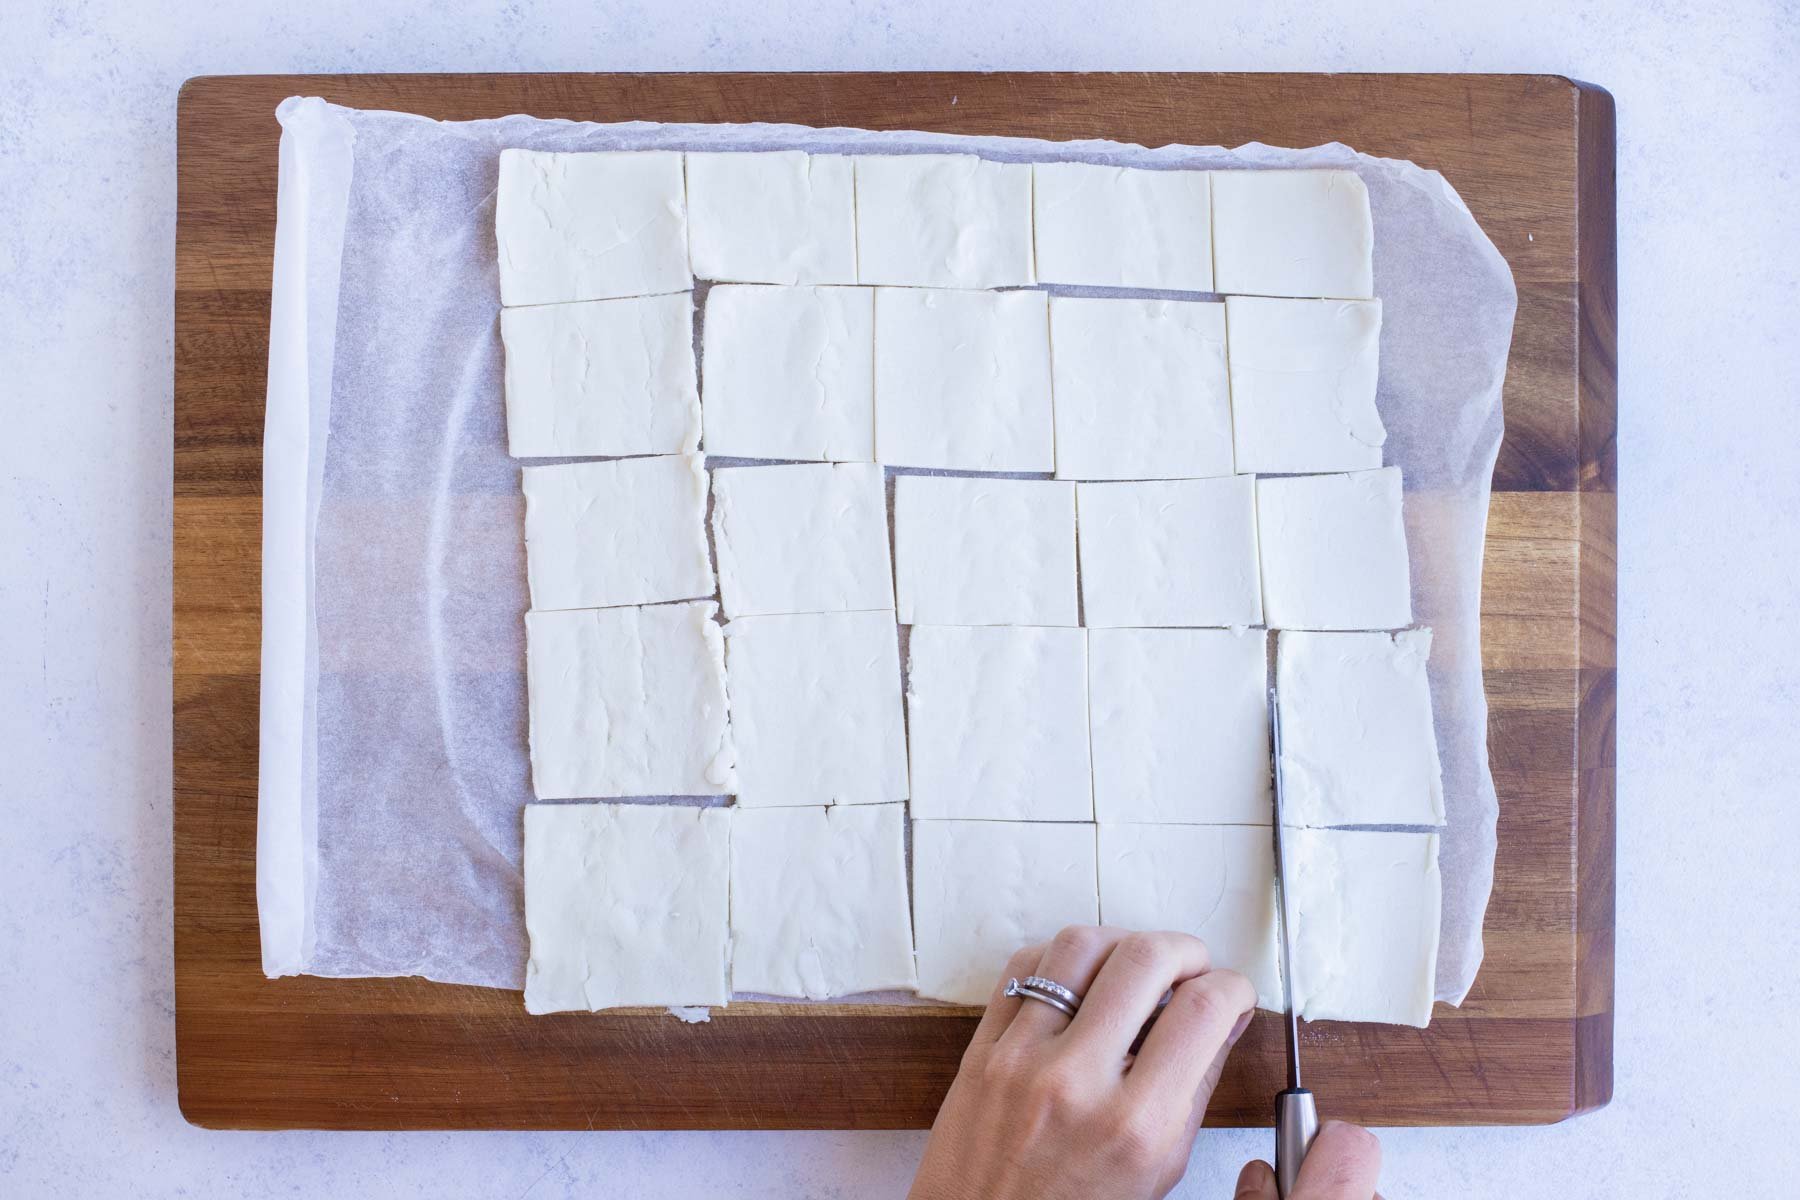 Puff pastry is cut into squares.